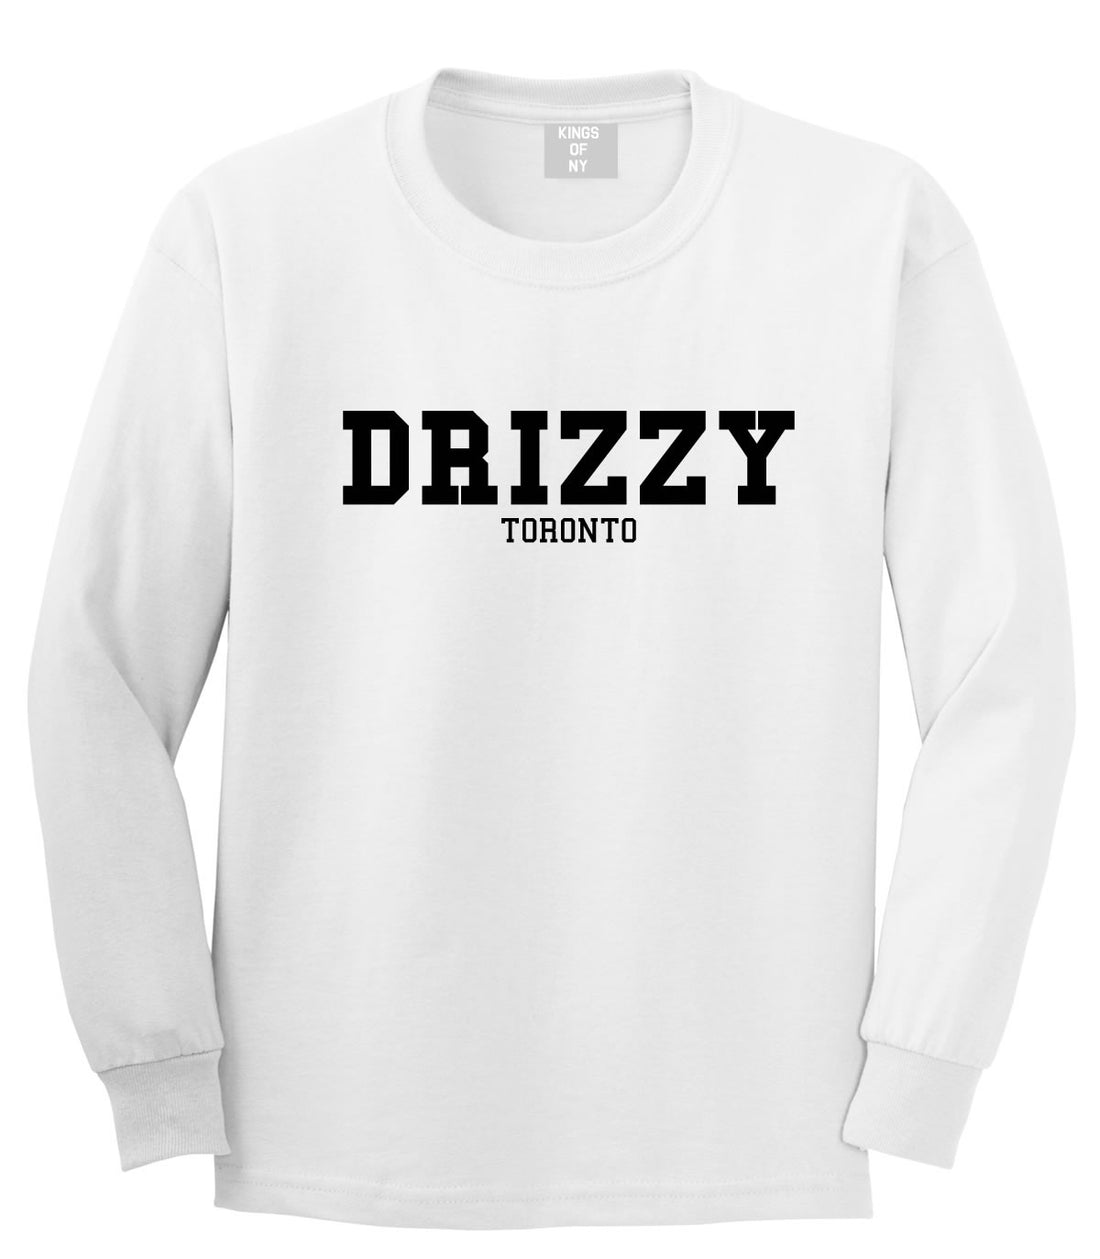 Drizzy Toronto Canada Long Sleeve T-Shirt in White by Kings Of NY